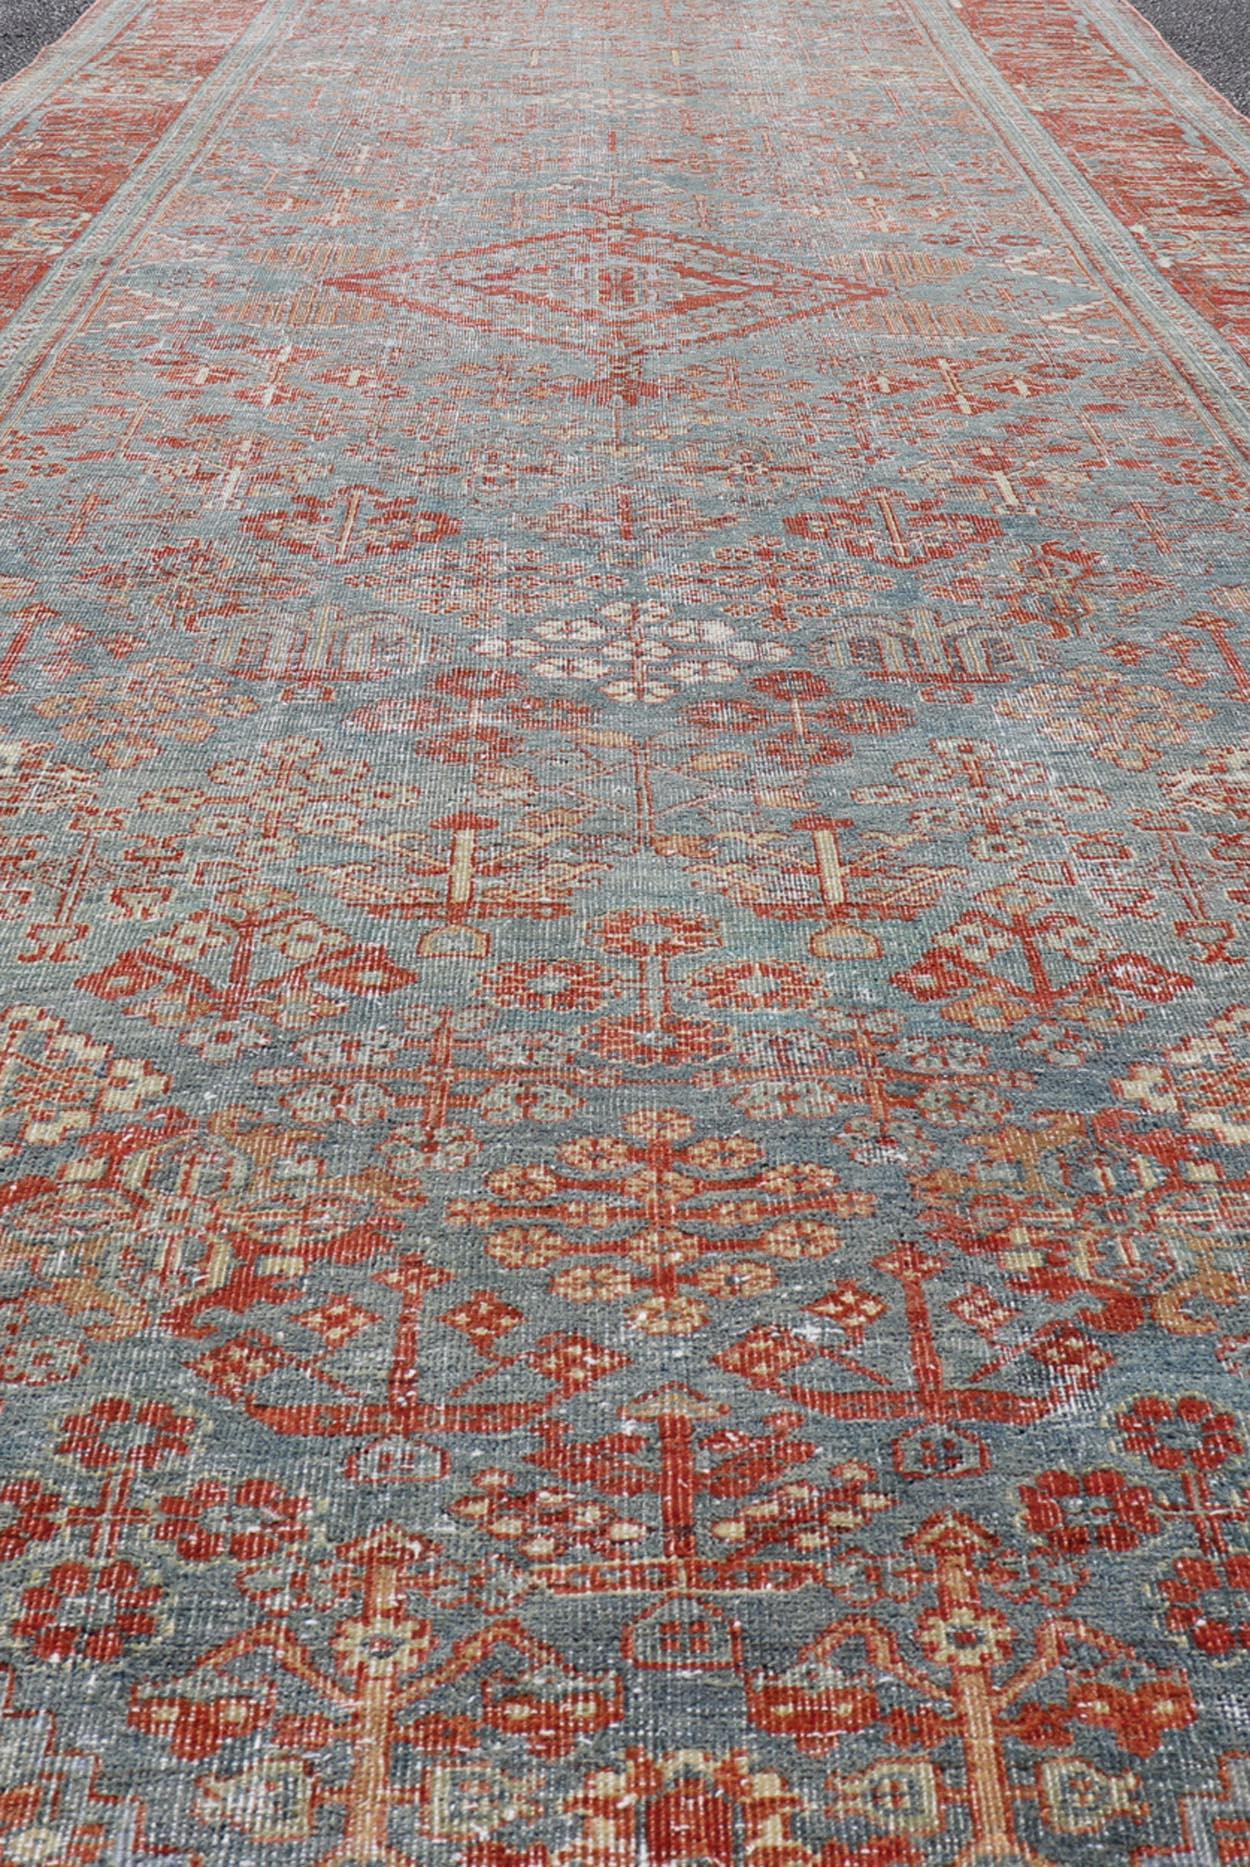 Antique Persian Joshaghan Gallery Rug with All-Over Sub-Geometric Diamond Design For Sale 4